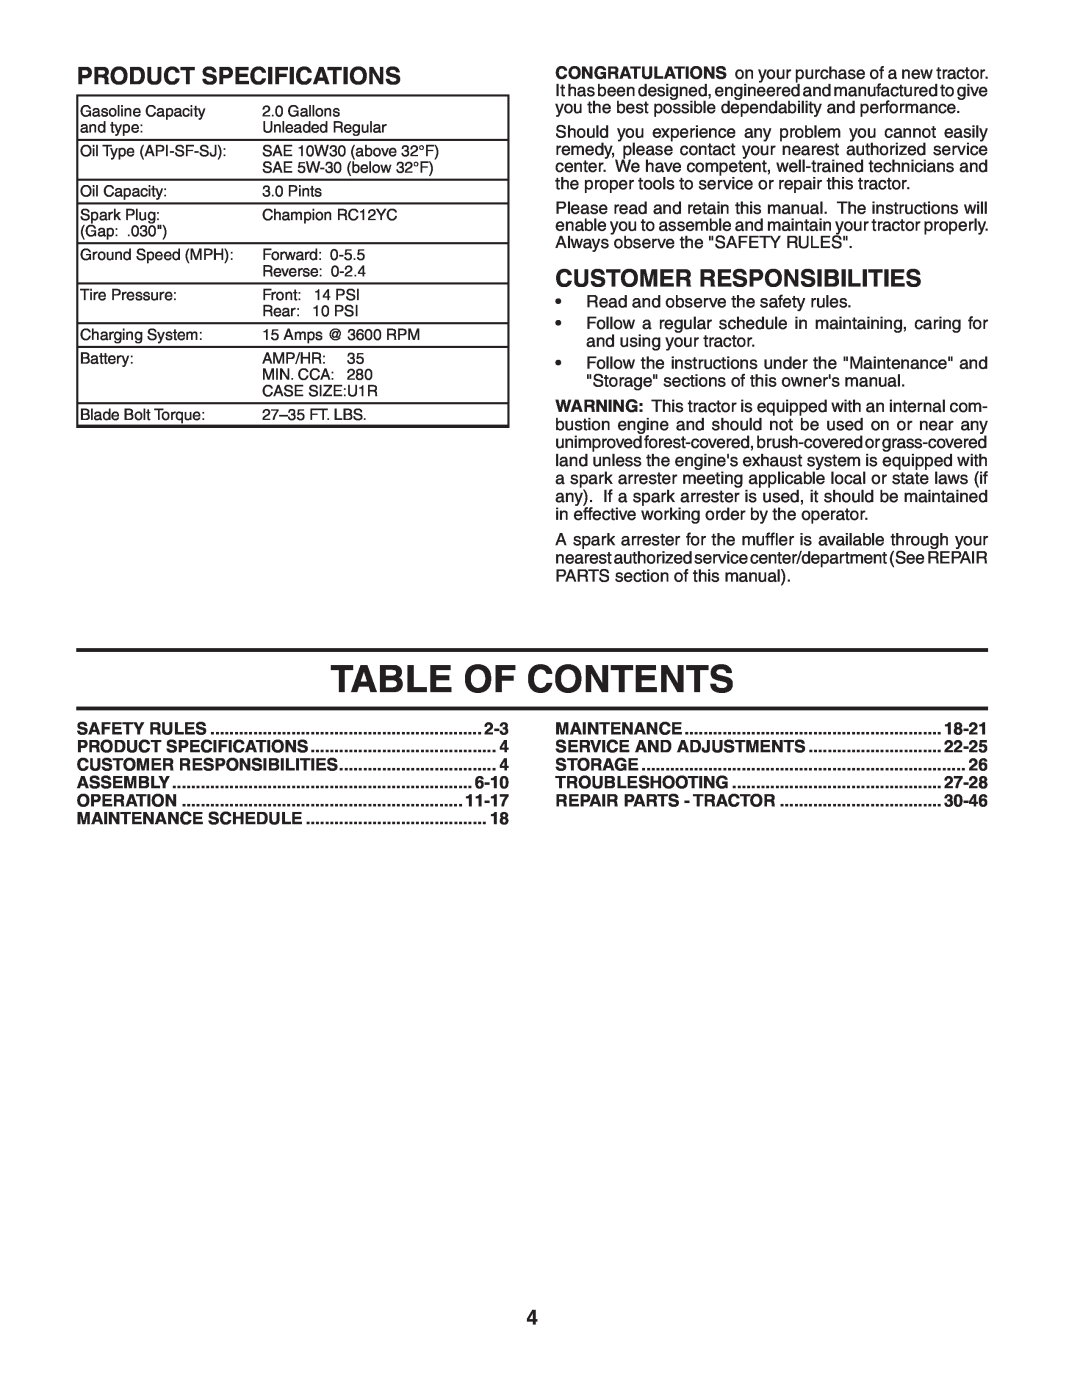 Husqvarna CTH151 owner manual Table Of Contents, Product Specifications, Customer Responsibilities 